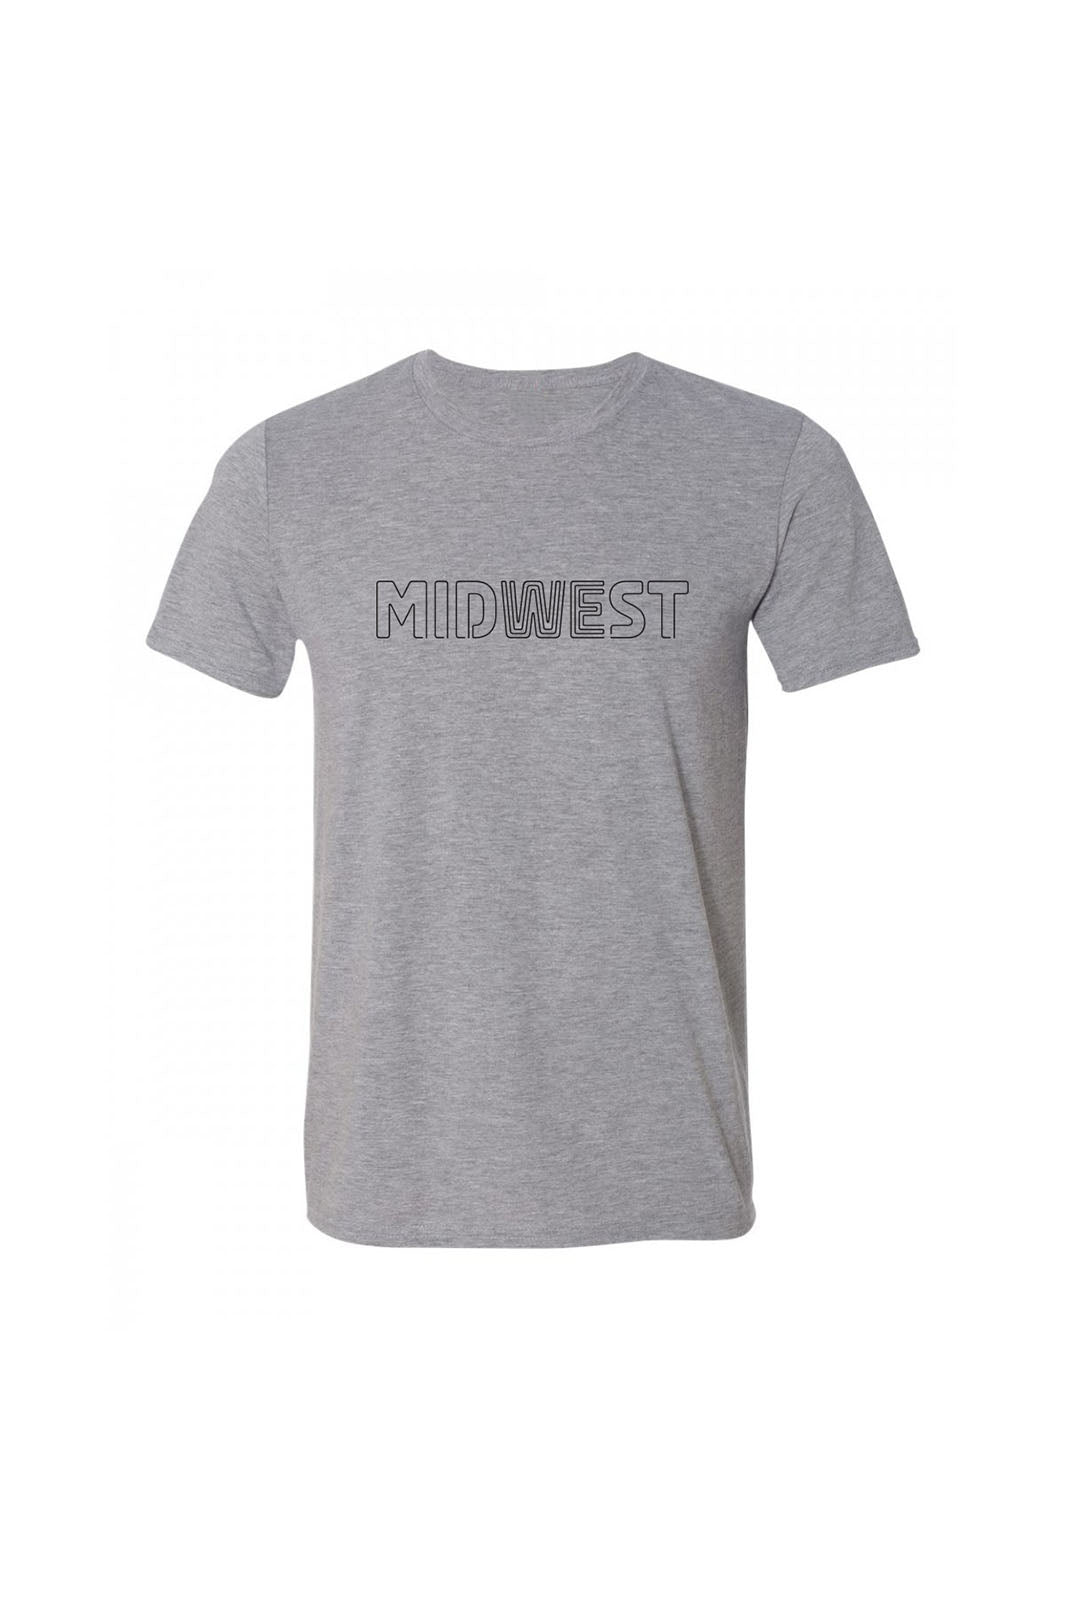 Heather grey t-shirt with original "Midwest" design by Cowboys and Astronauts. 